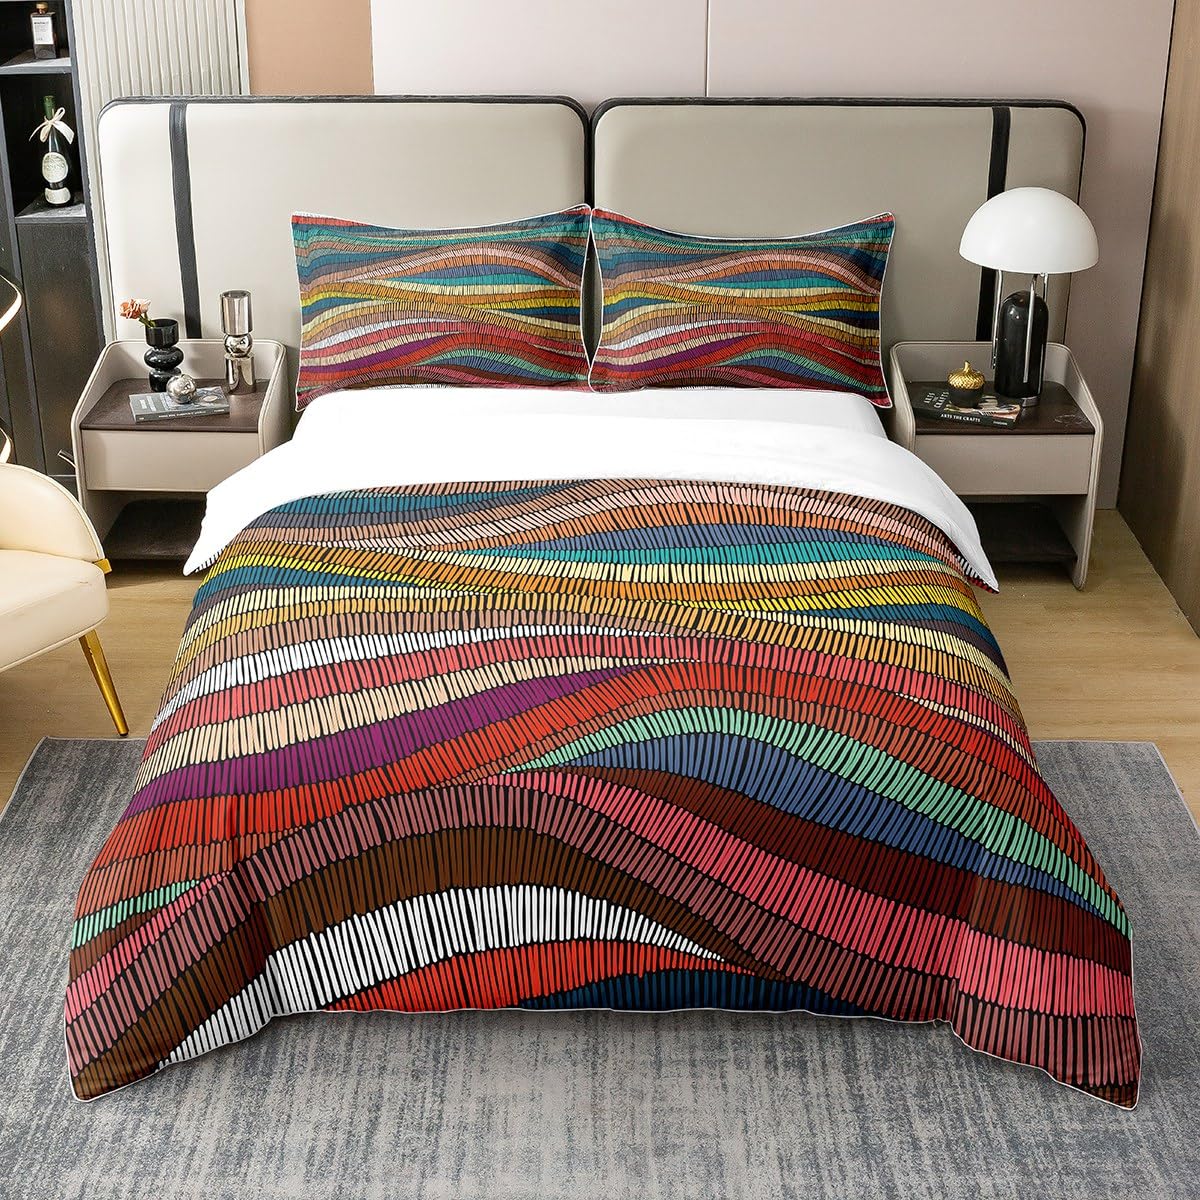 100% Cotton Boho Duvet Cover King Bohemian Wavy Bedding Set Rainbow Embroidered Waves Comforter Cover Geometric Tribal Ethnic Bedroom Decor Colorful Abstract Quilt Cover for Adult - image 3 of 6